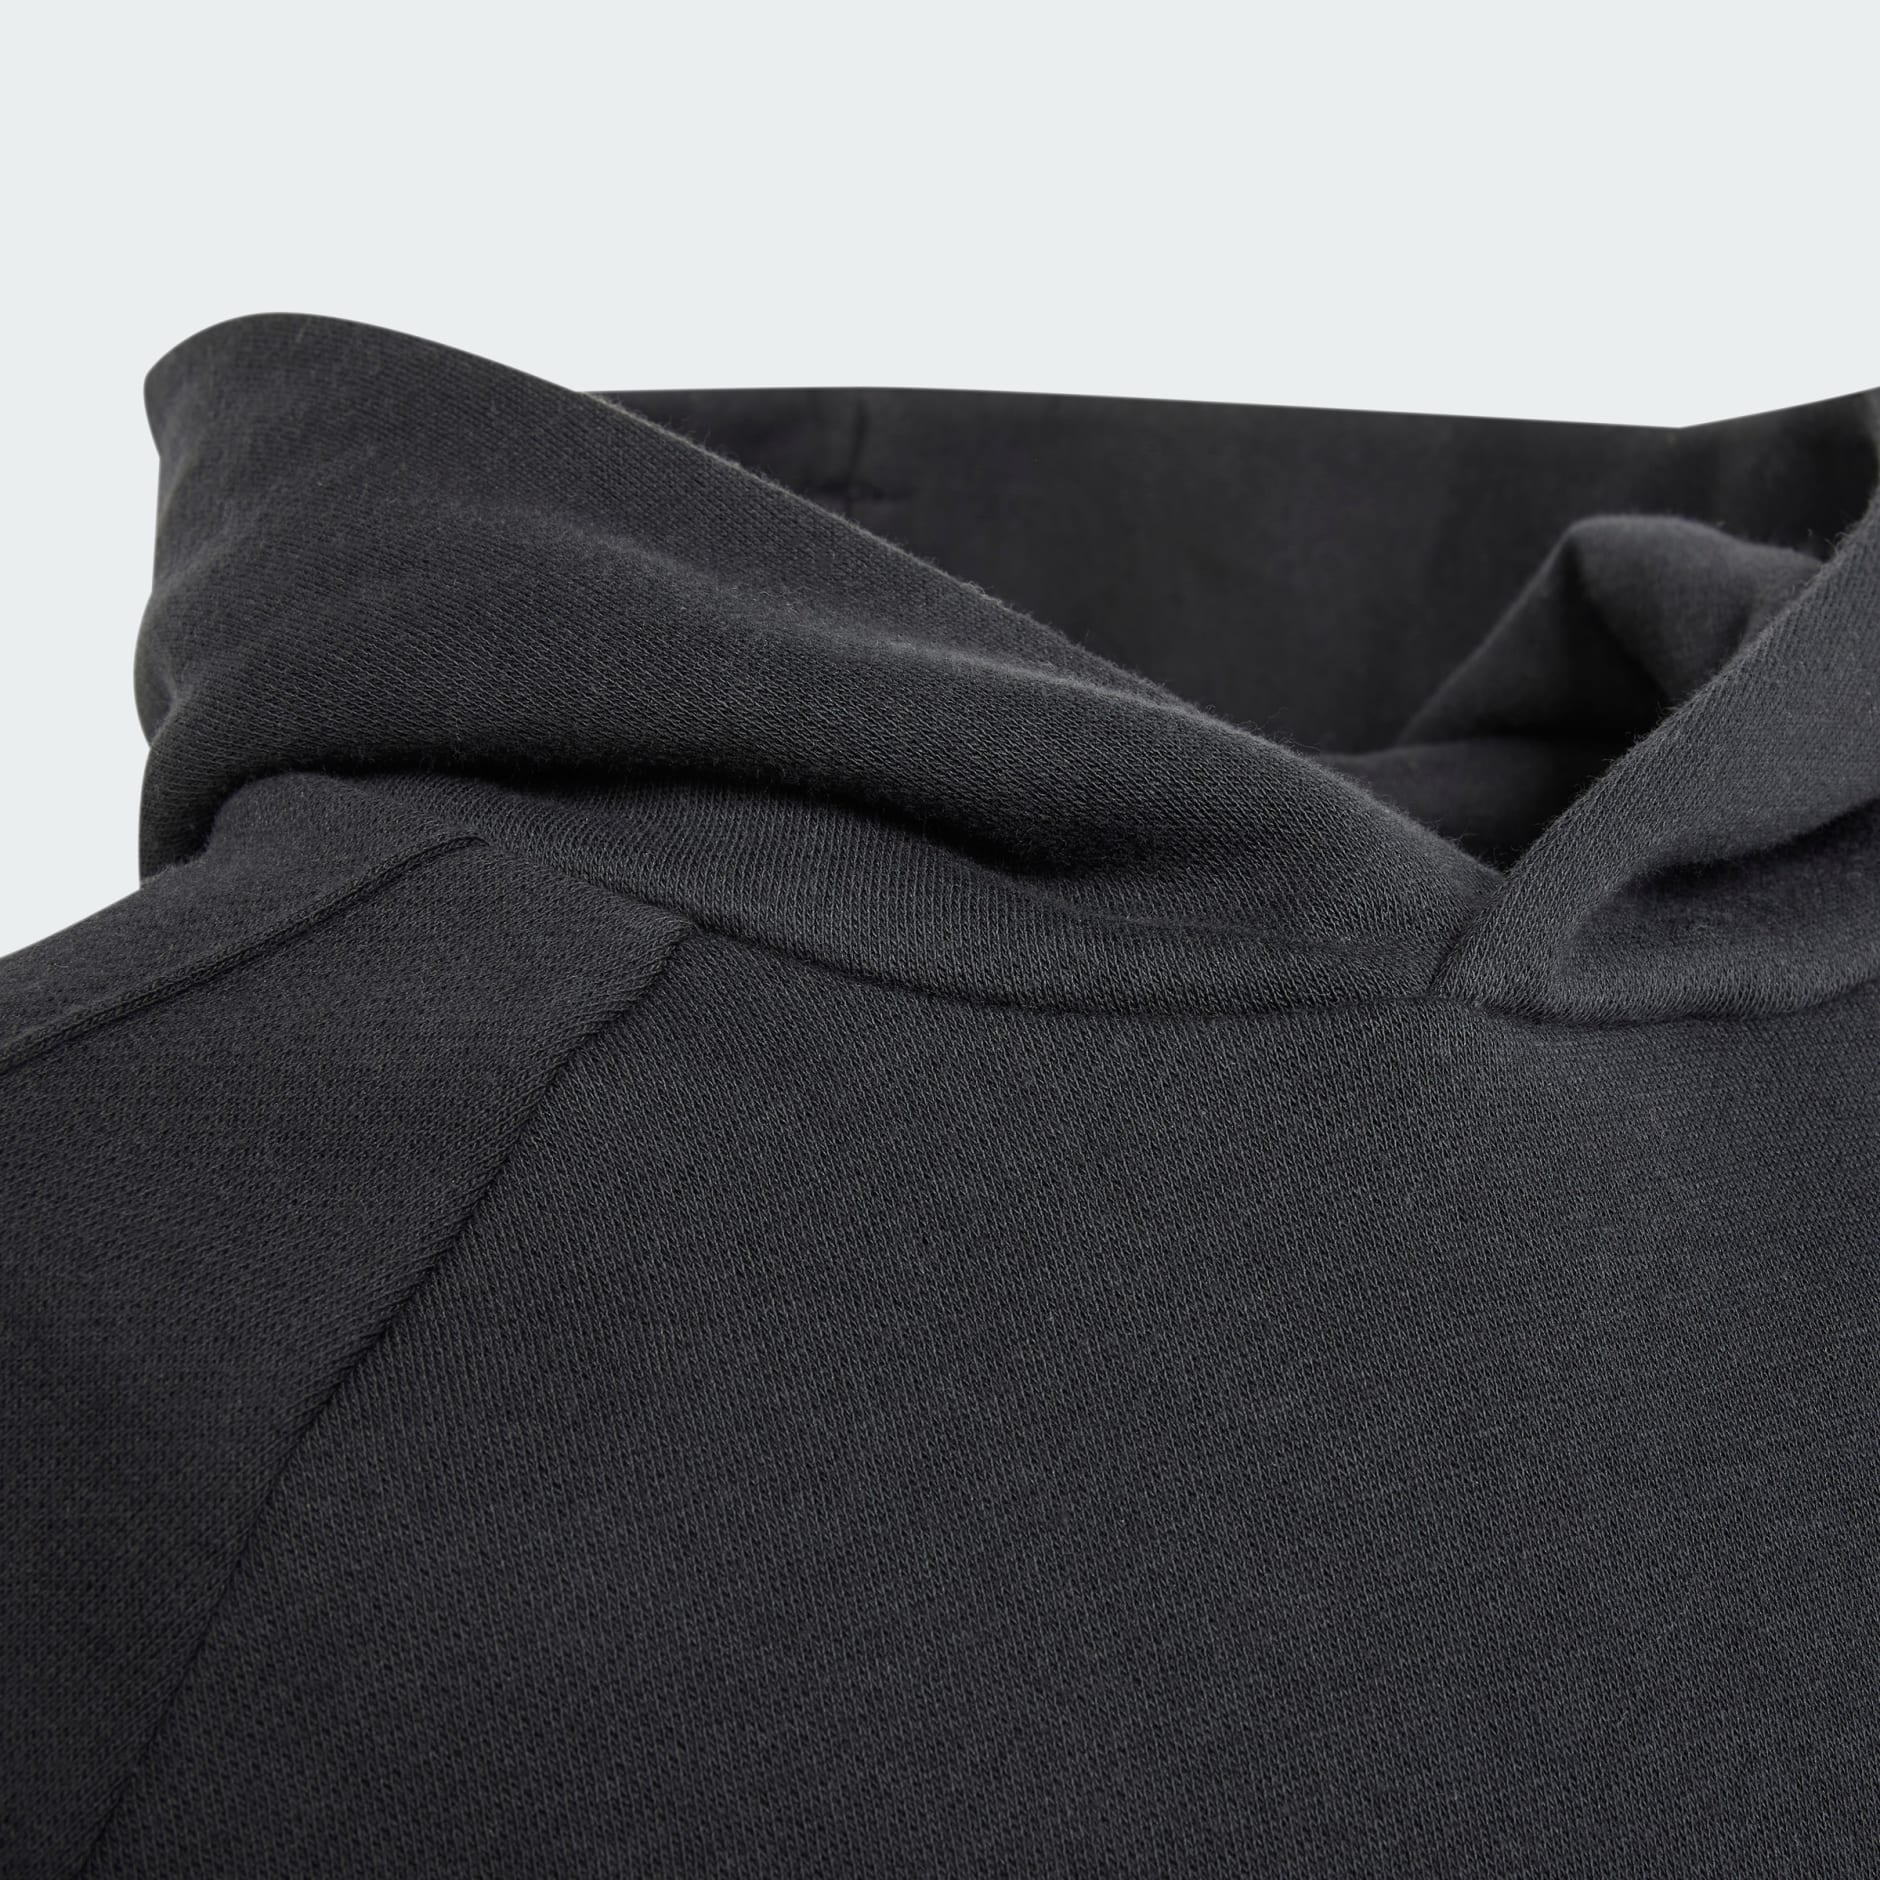 Clothing - The Safe Place Hoodie - Black | adidas South Africa